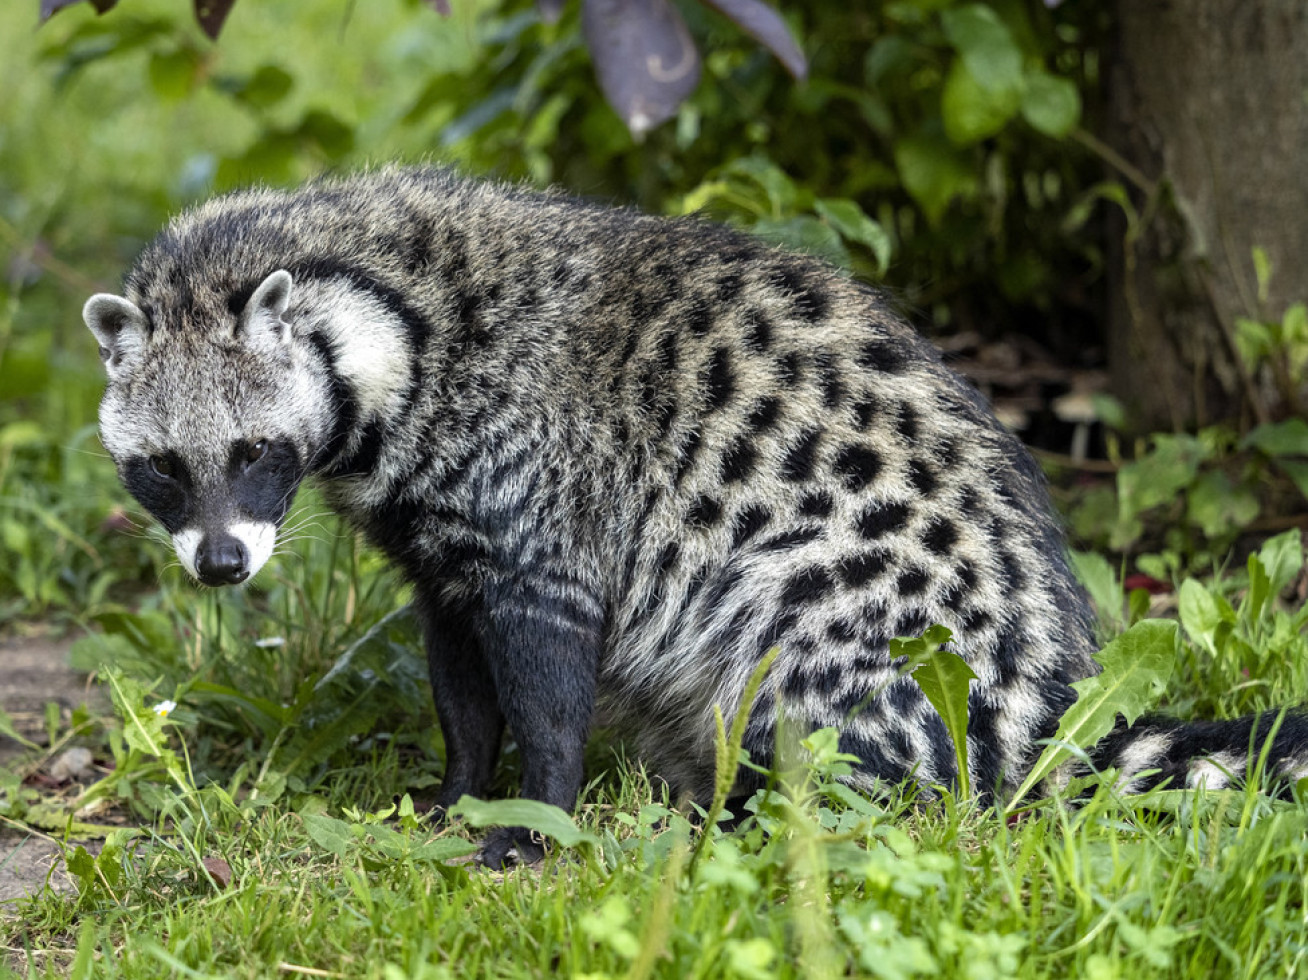 An African civet in the wild